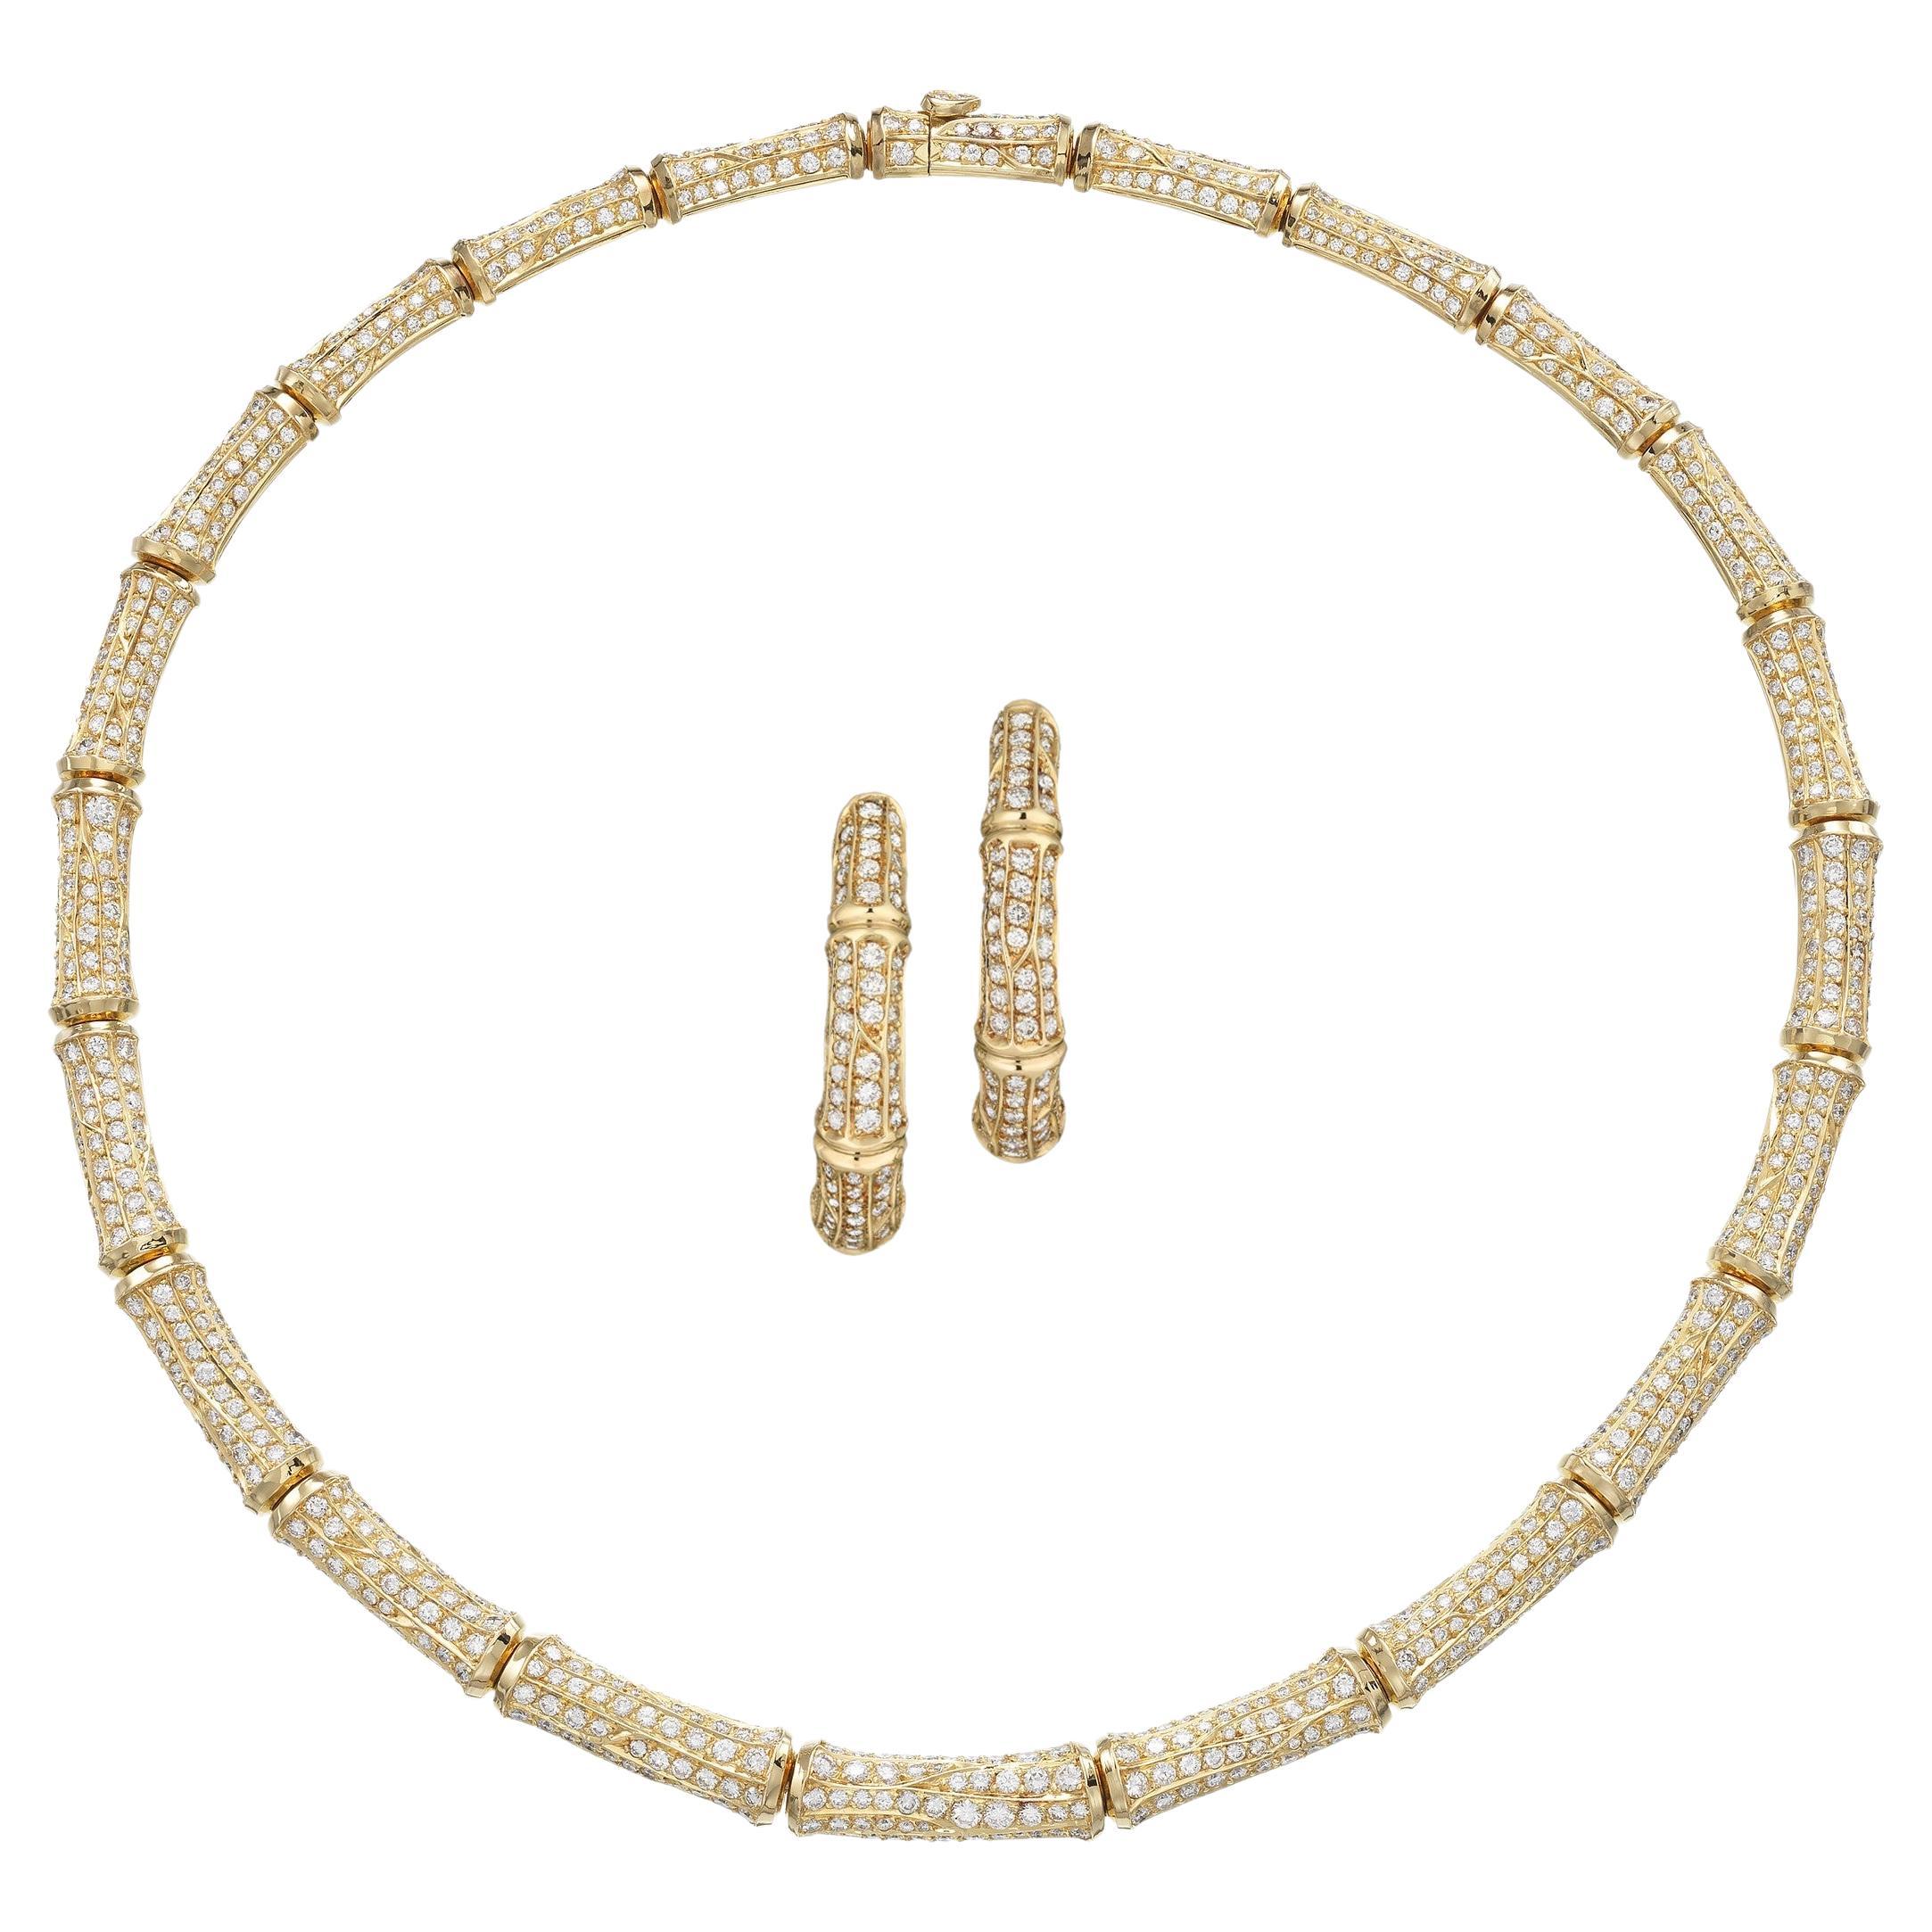 Cartier Bamboo 26cts Diamond Suite in 18K Gold Necklace and Earrings For Sale